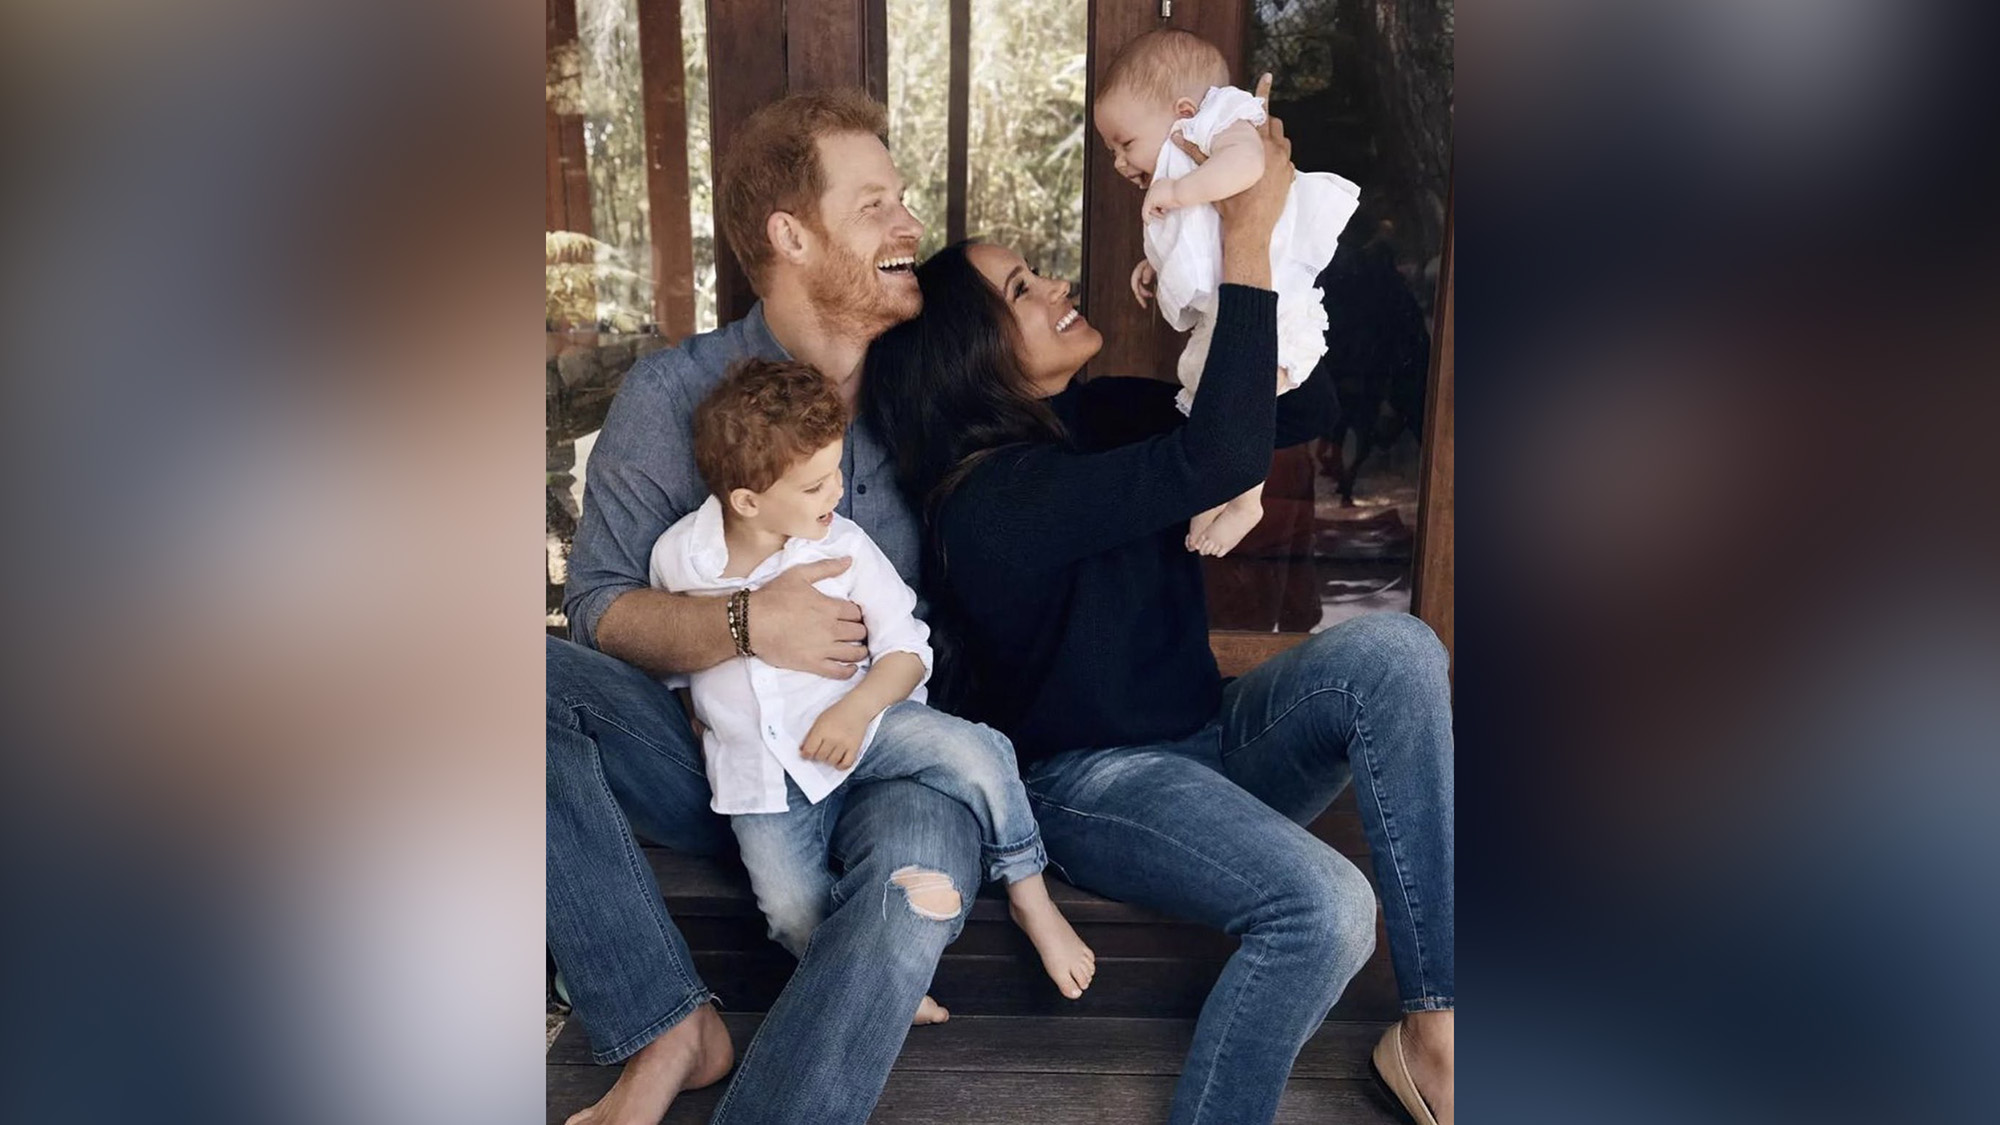 Prince Harry and Meghan’s children become Prince Archie, Princess Lilibet of Sussex